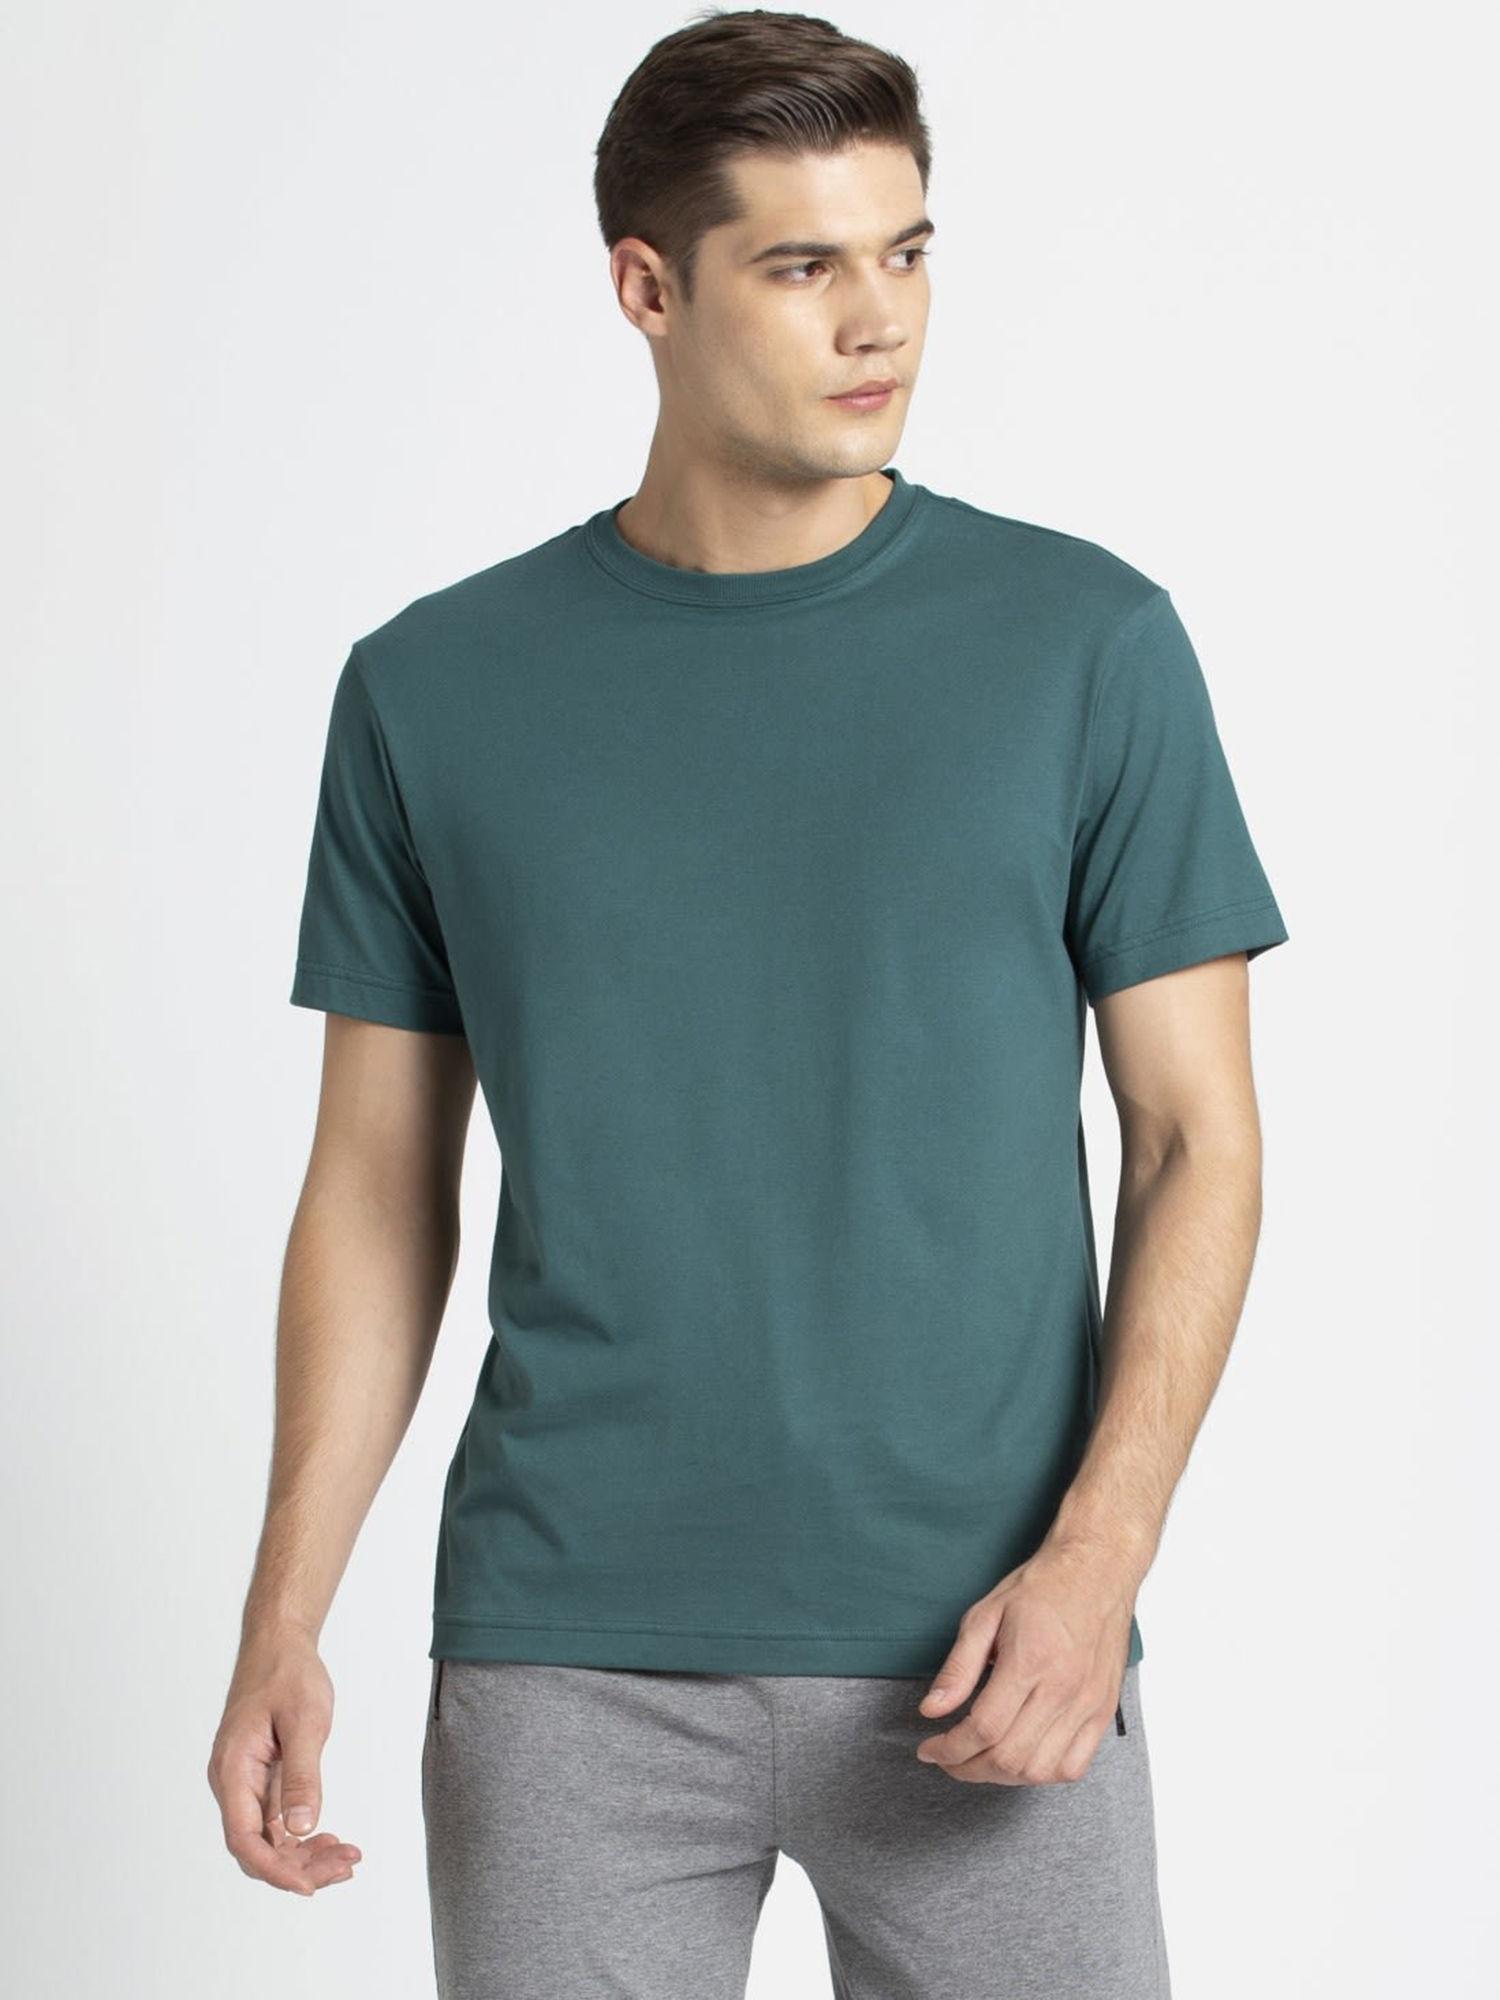 2714 men's super combed cotton rich solid round neck half sleeve t-shirt - pacific green